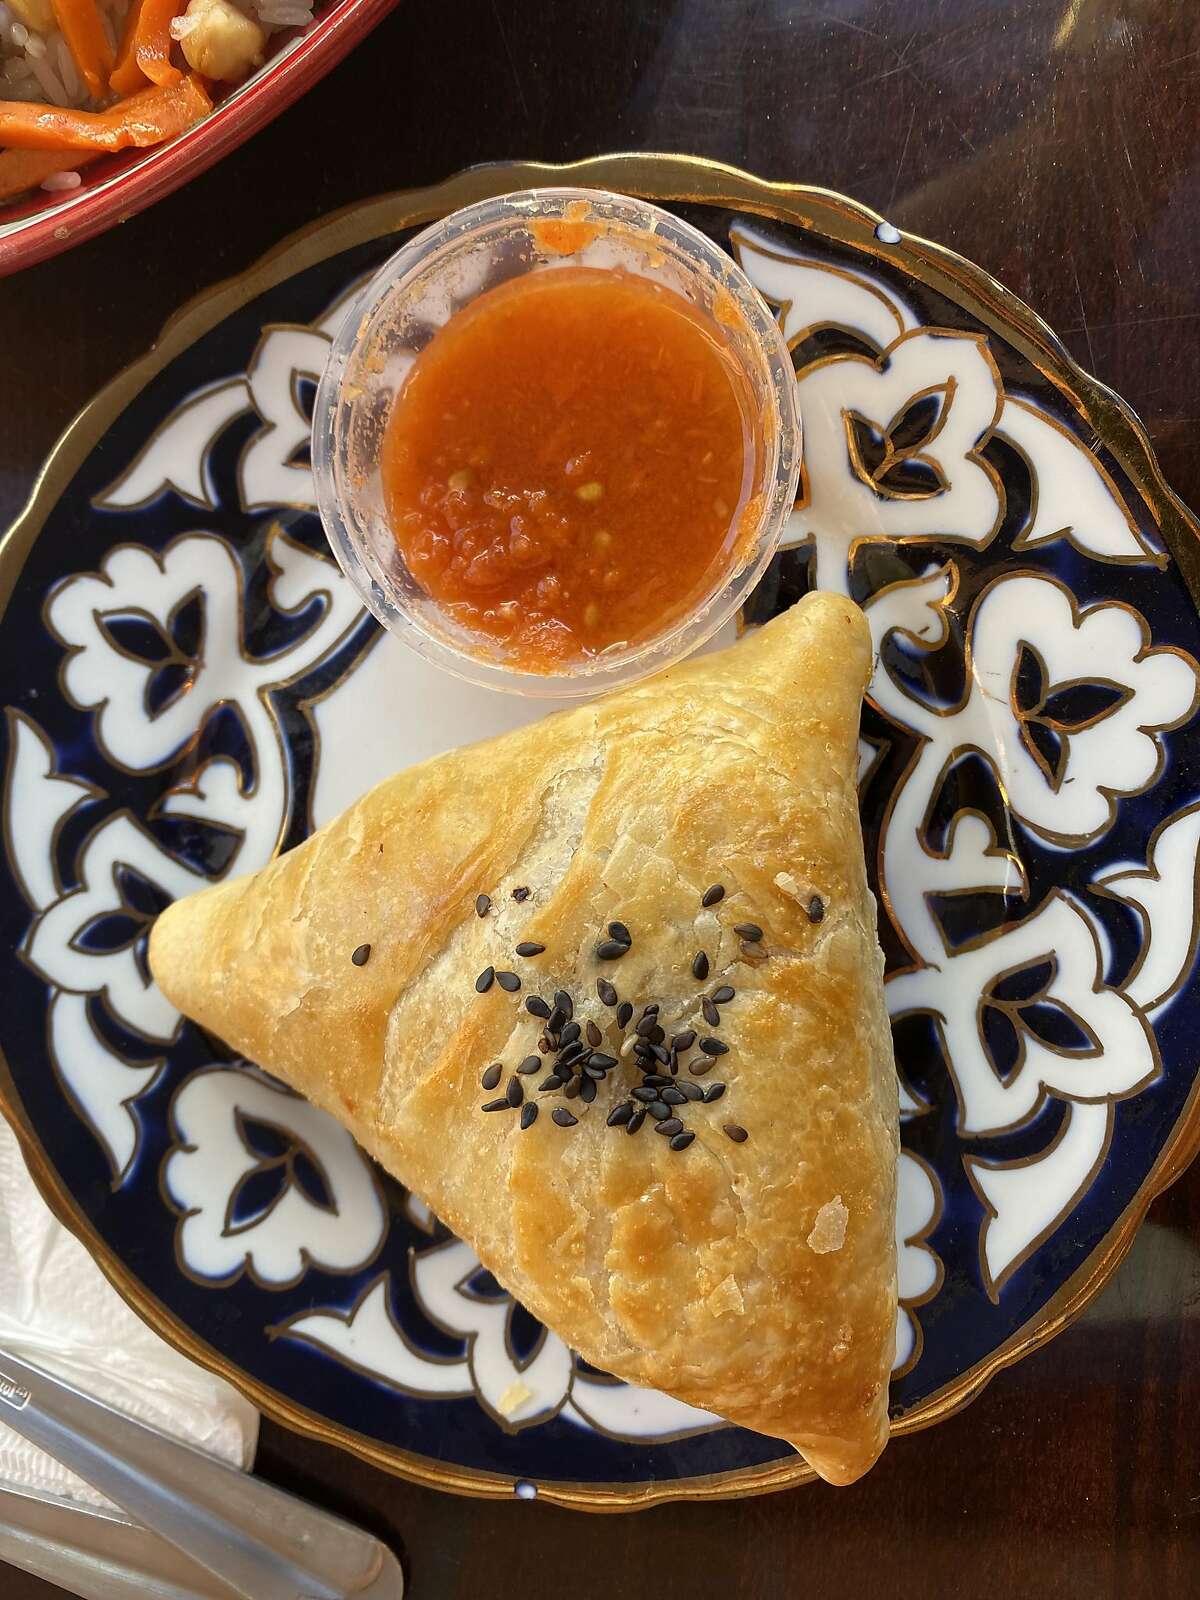 The hearty baked samsa of Halal Dastarkhan in S.F. is accompanied by a mild tomato-based sauce.